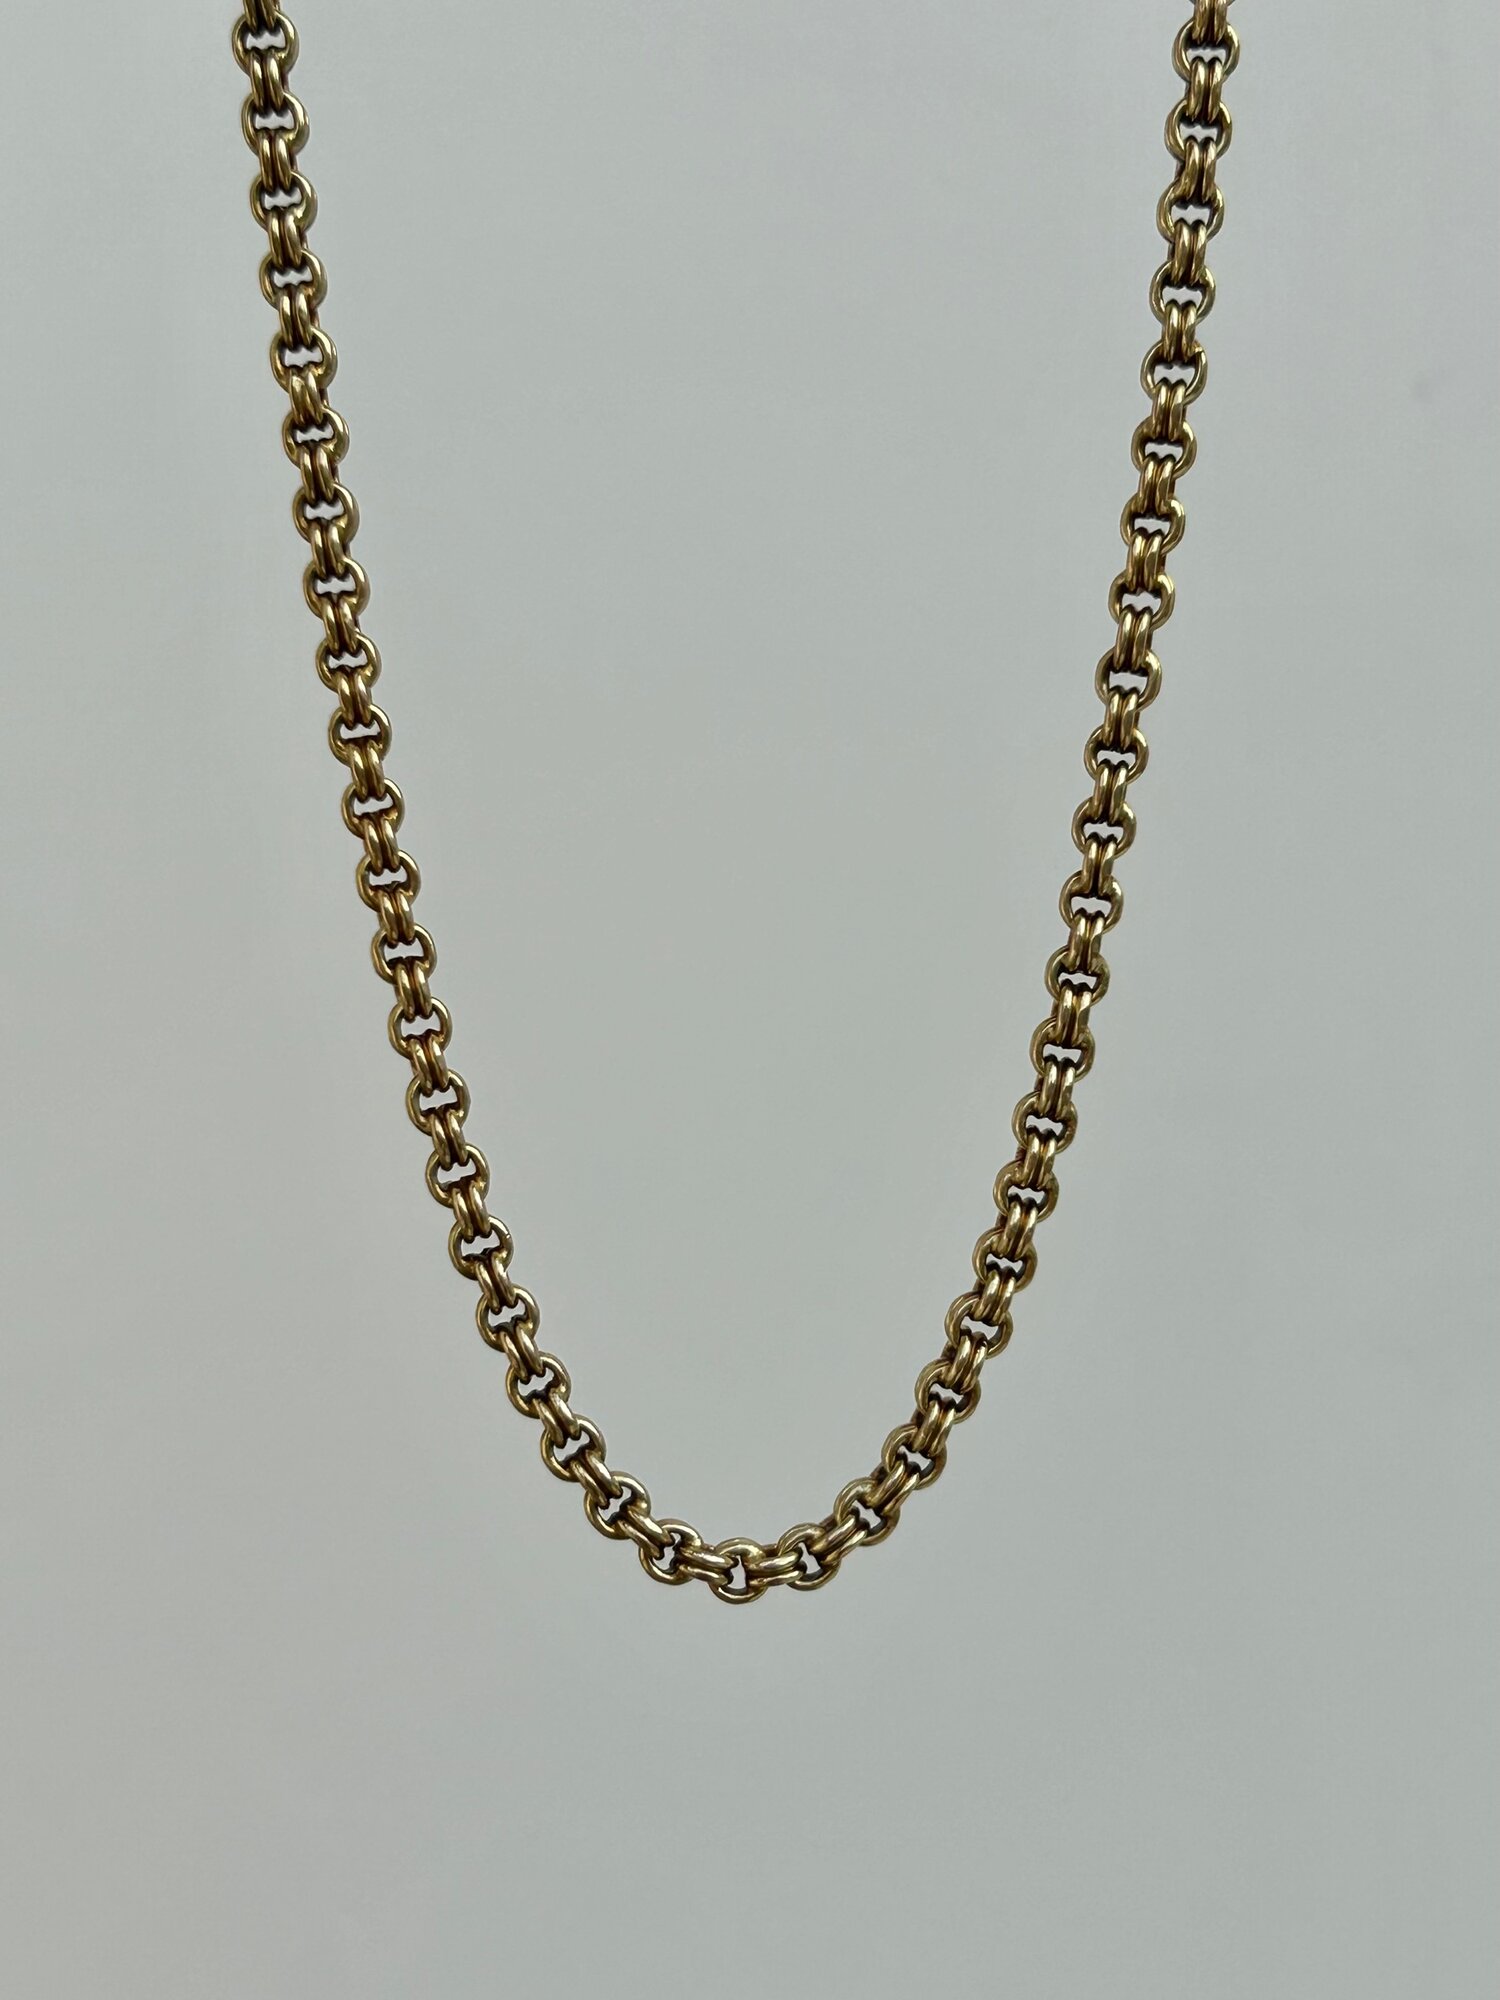 Antique Chunky 15ct Yellow Gembank1973 Chain with — Barrel Rope Gold Clasp